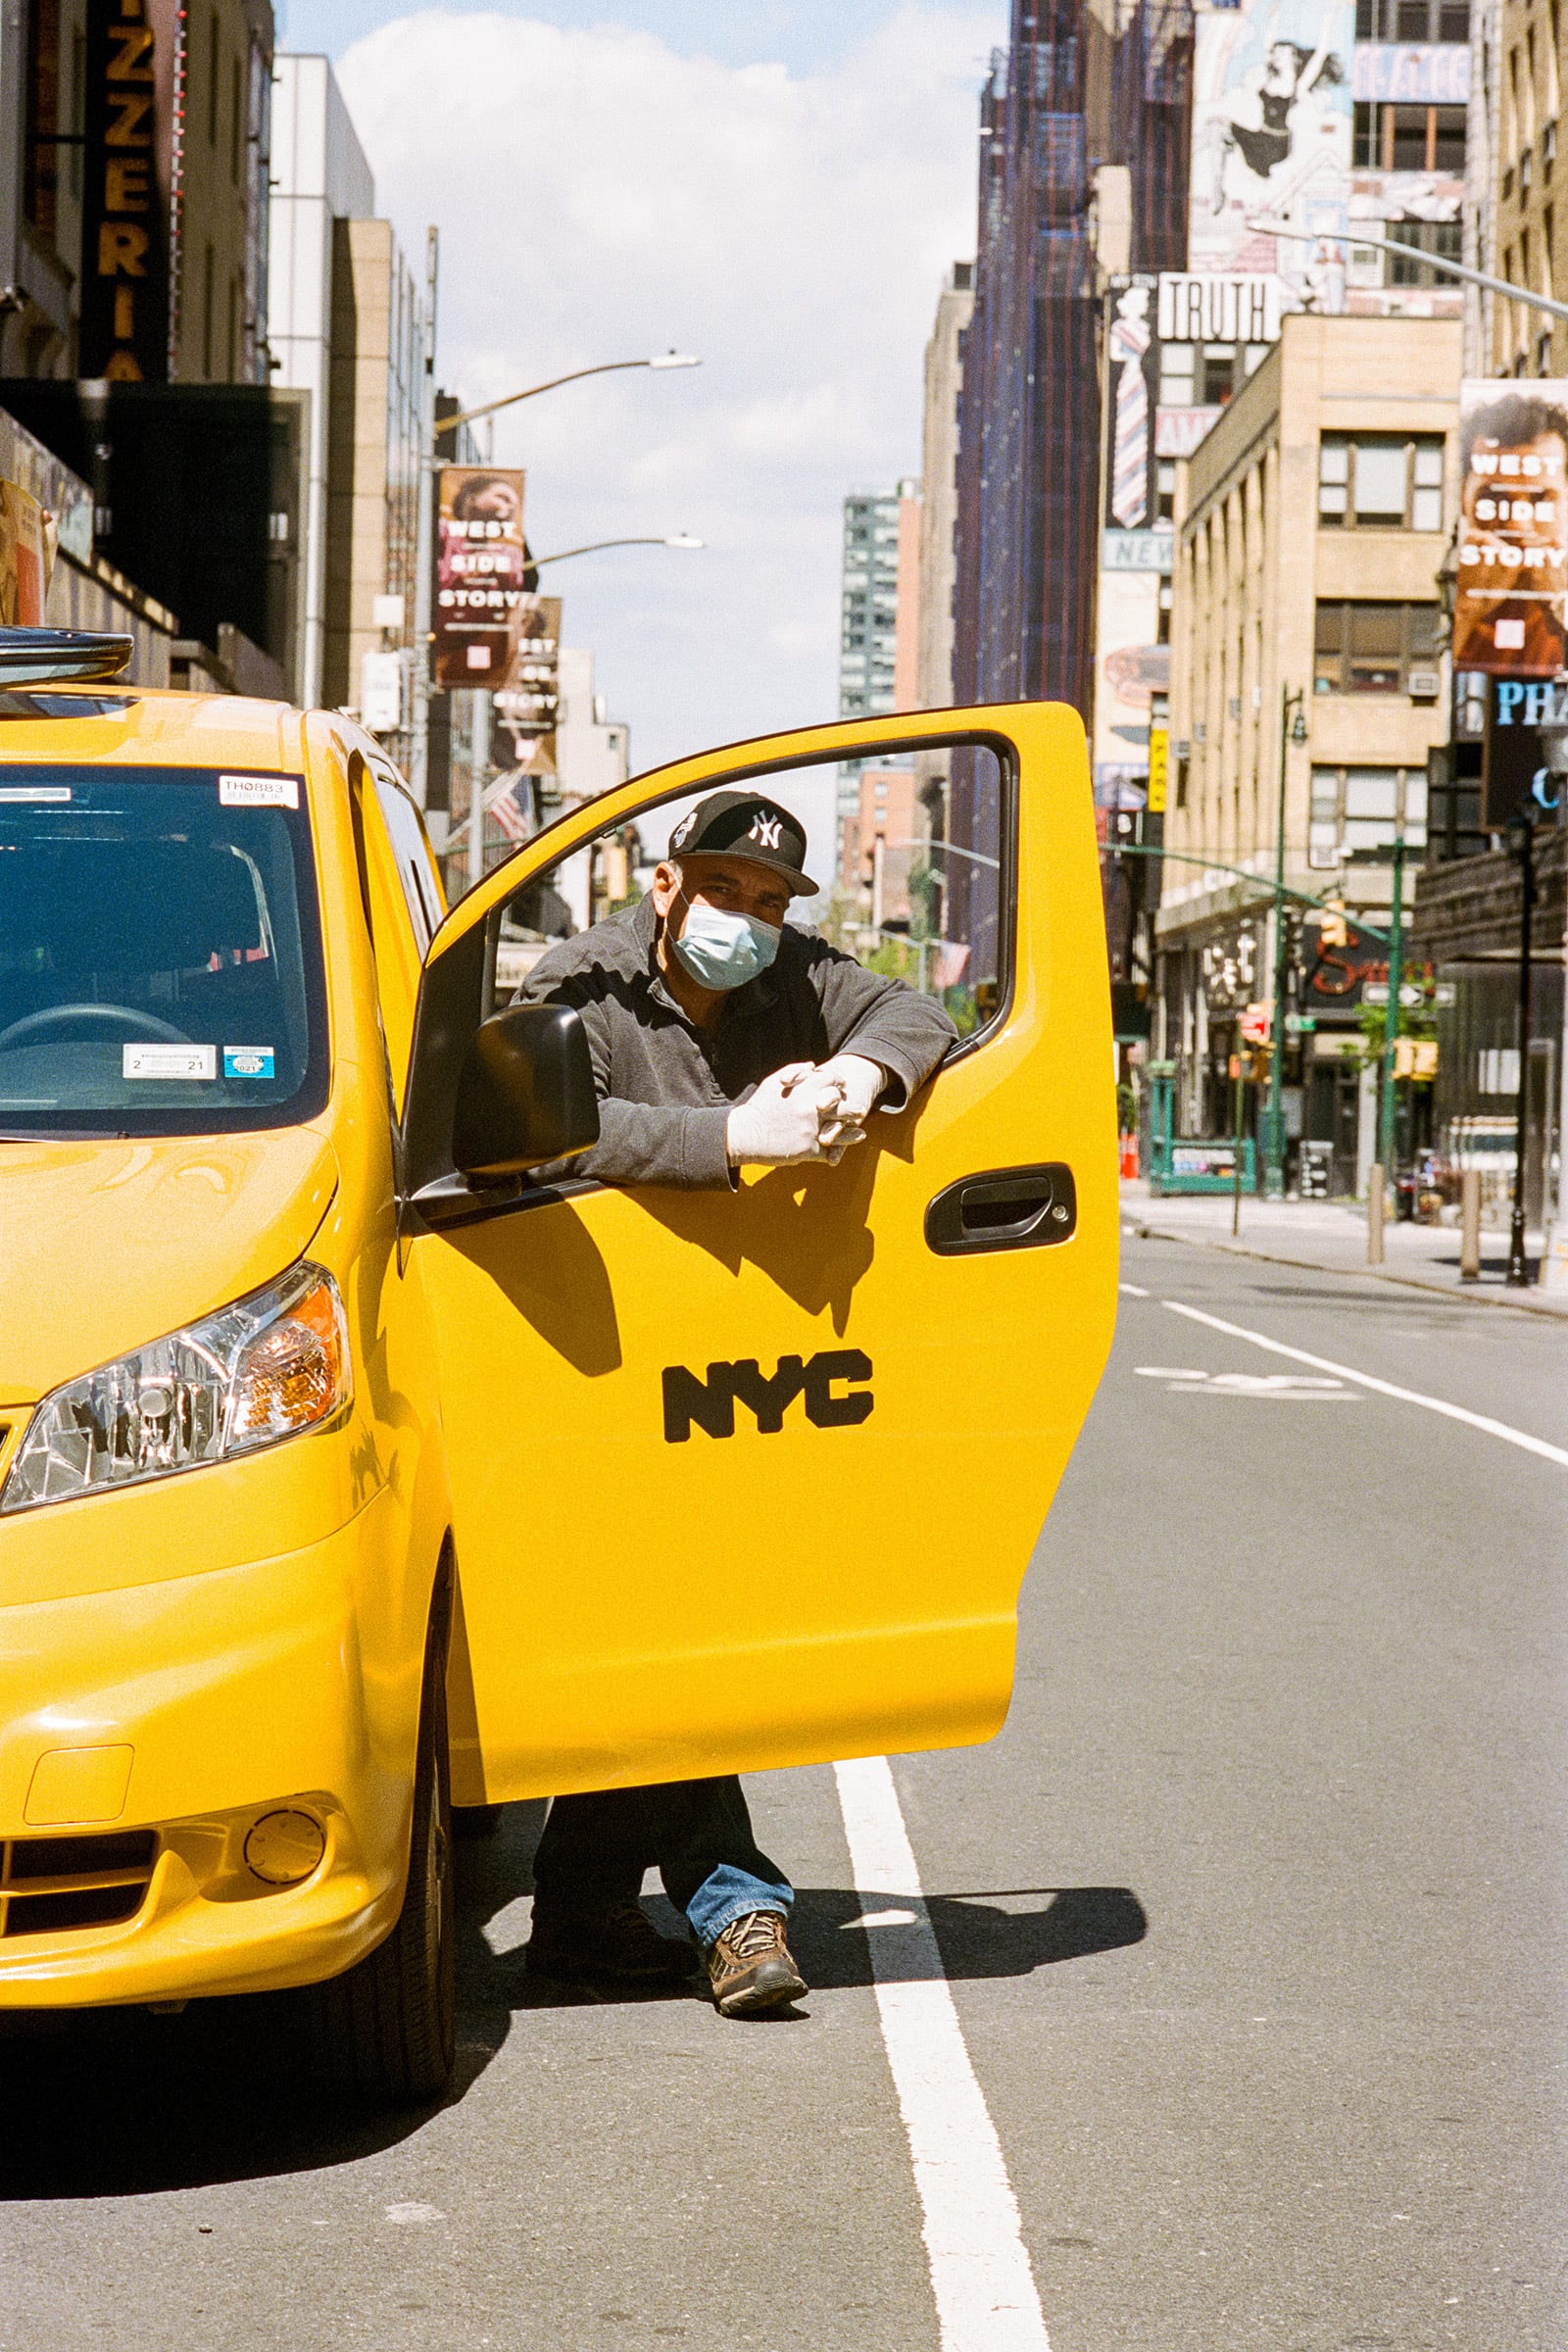 Mohamed Eleissawy, 63, Manhattan.  New York City's Taxi Drivers Are in Peril as They Brave the Coronavirus and Uncertain Futures,  May 15.